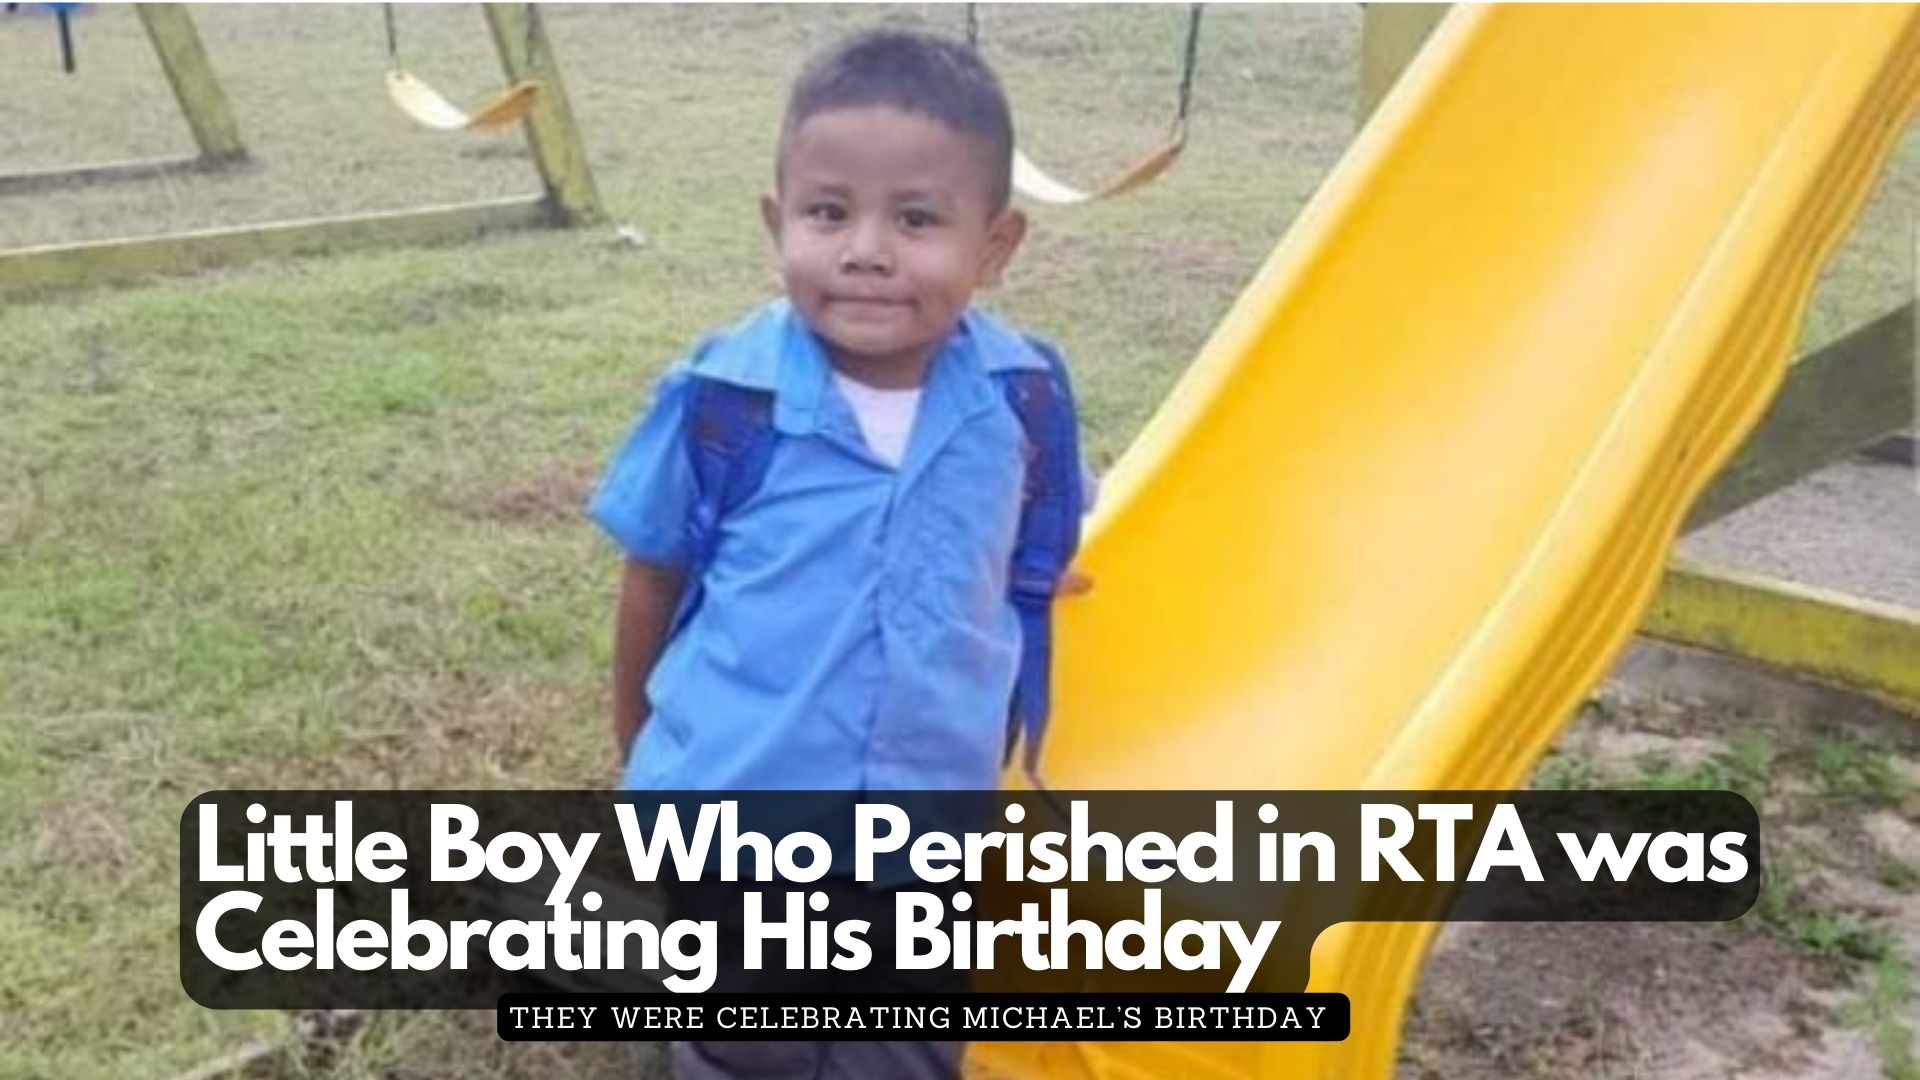 Little Boy Who Perished in RTA was Celebrating His Birthday